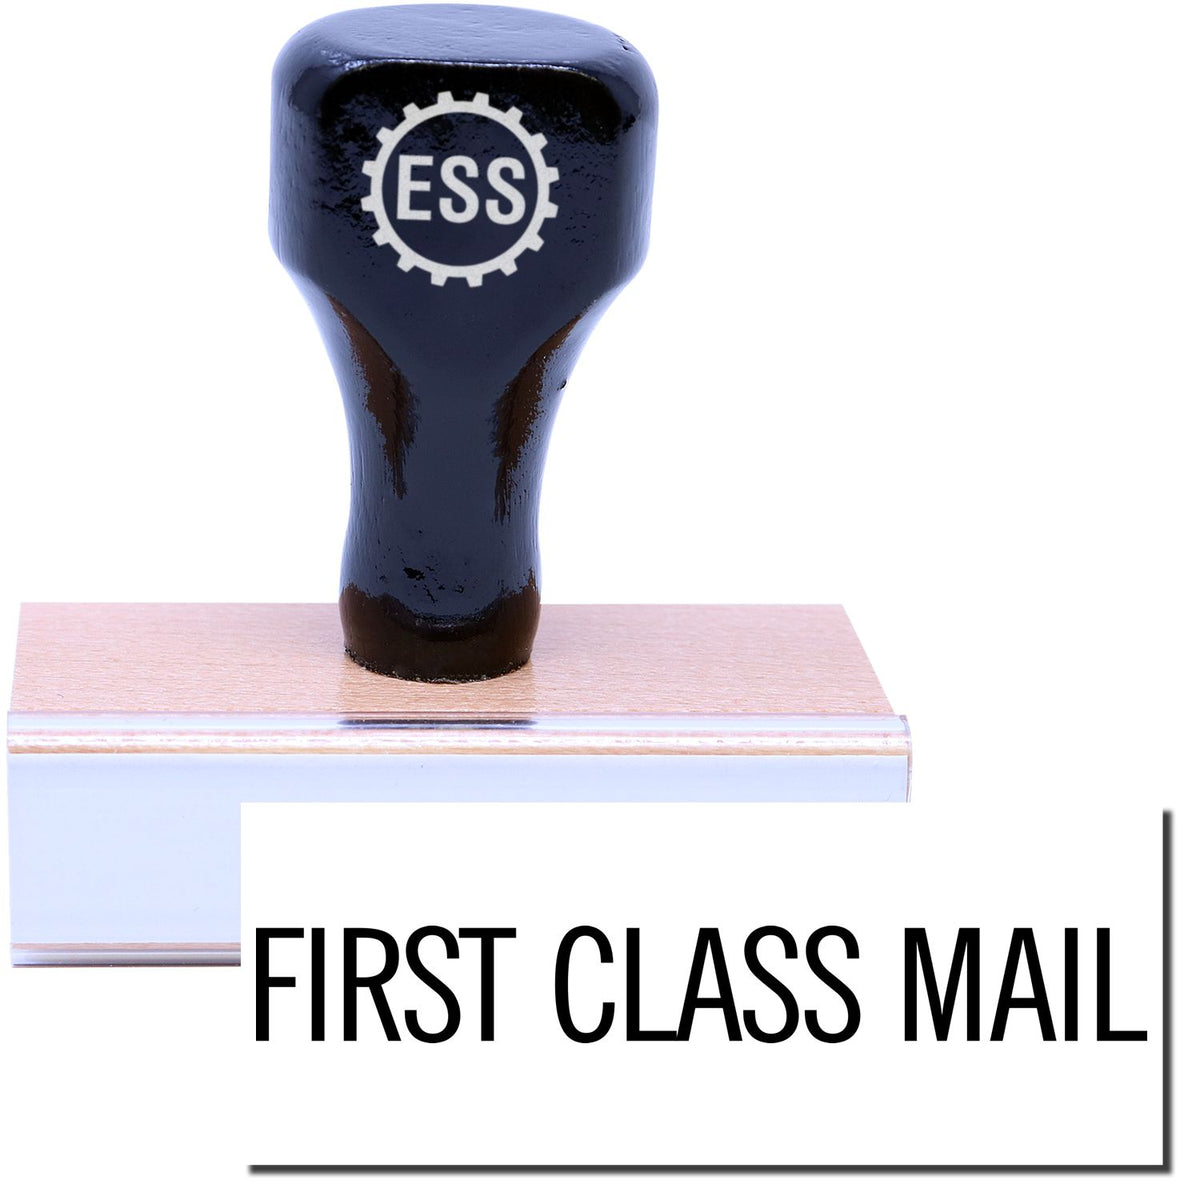 A stock office rubber stamp with a stamped image showing how the text &quot;FIRST CLASS MAIL&quot; in a large narrow font is displayed after stamping.